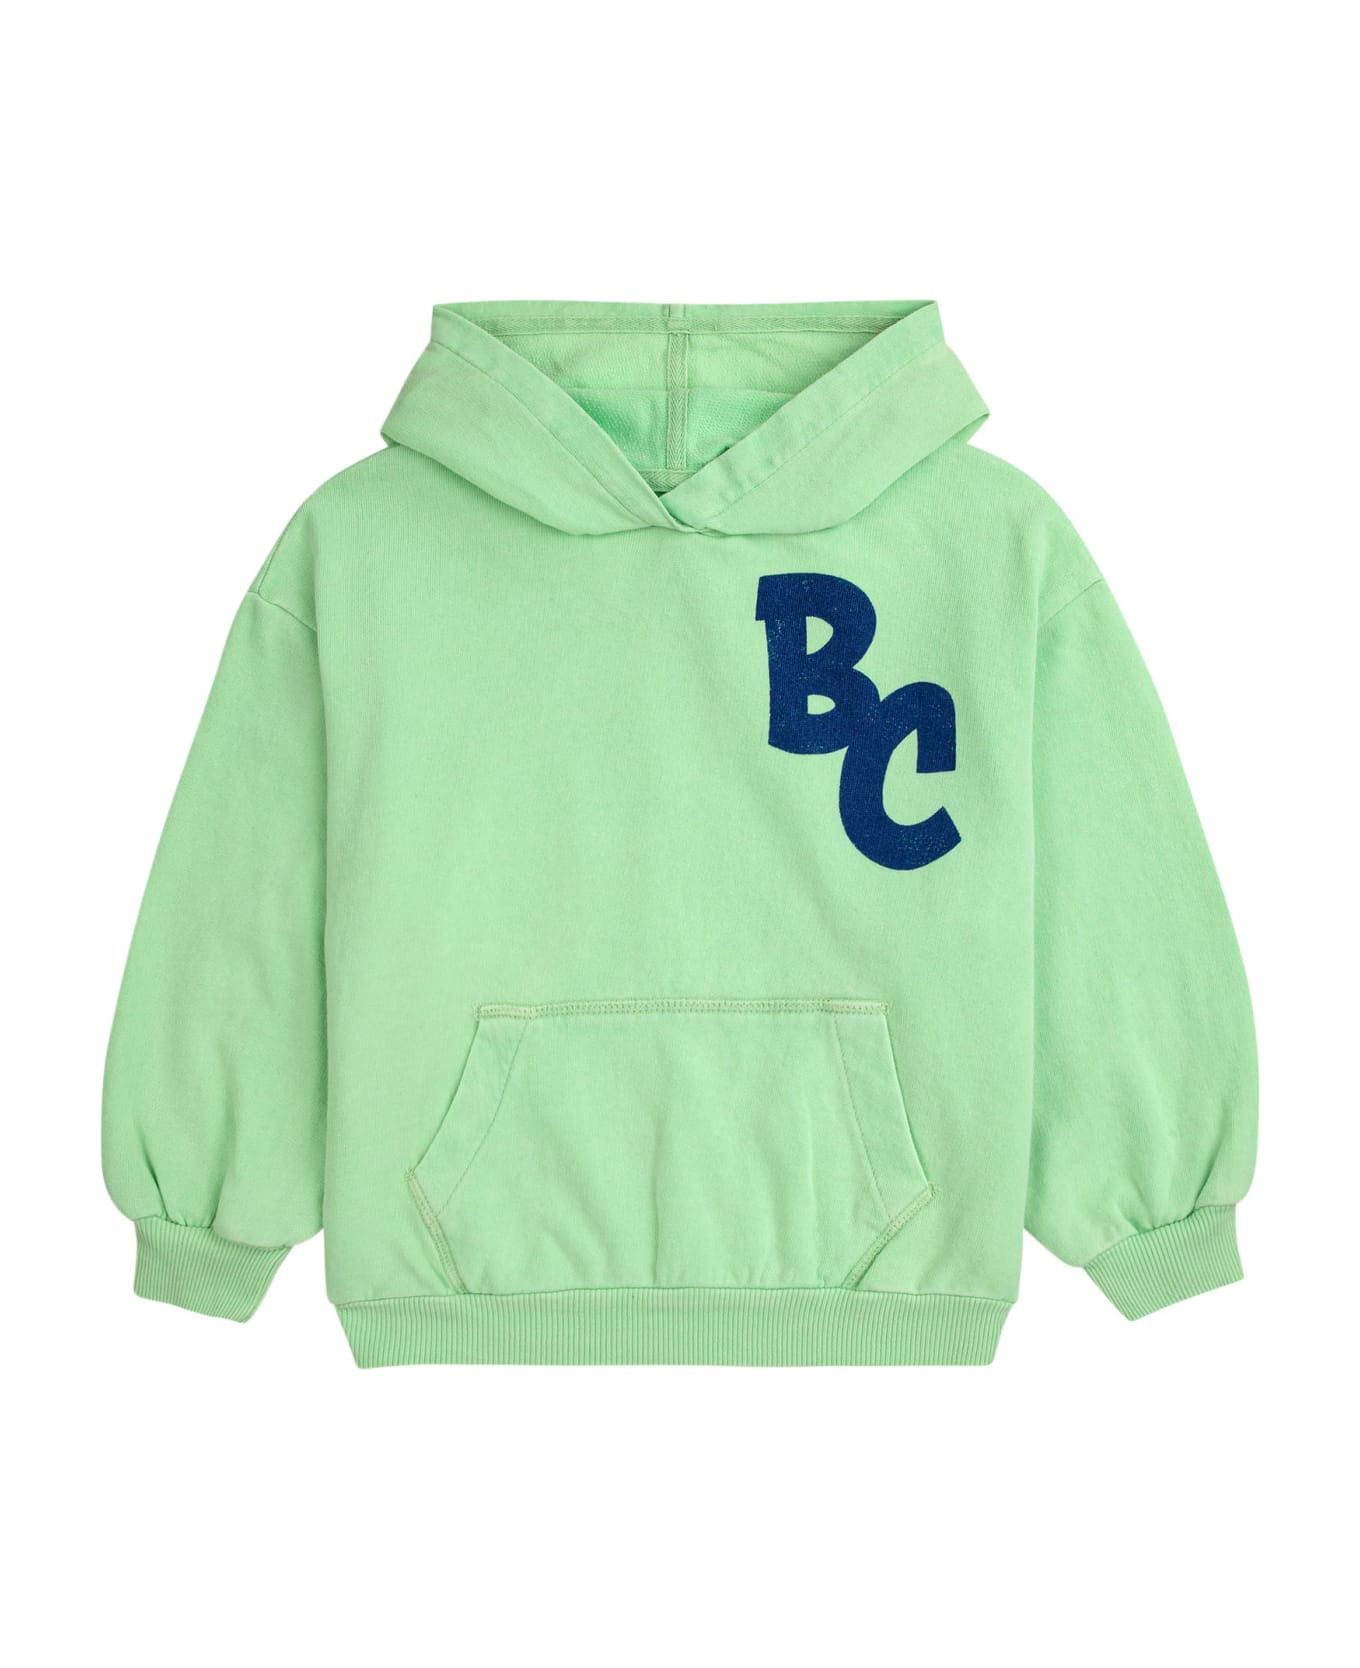 Bobo Choses Green Sweatshirt For Kids With Multicolor Logo - Green